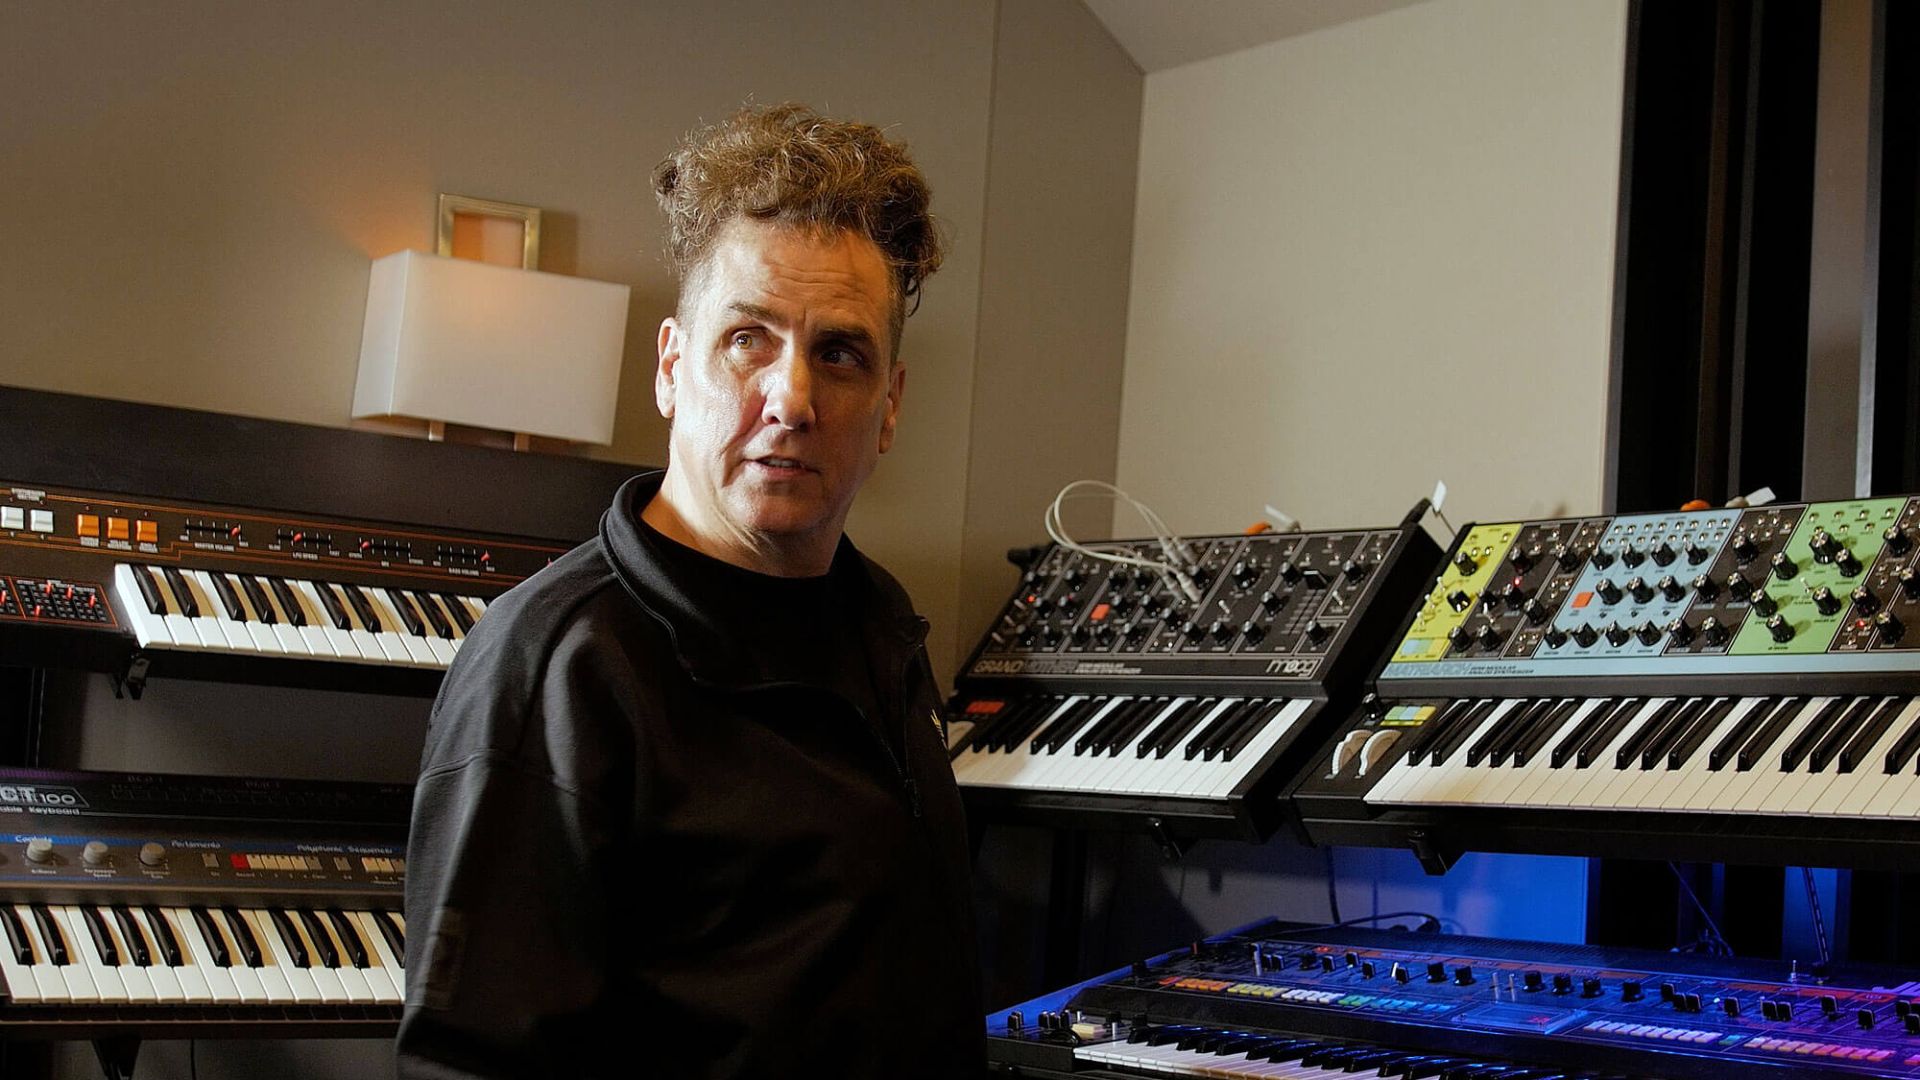 Mike Dean Teases Unreleased New Moog “Muse” Synth